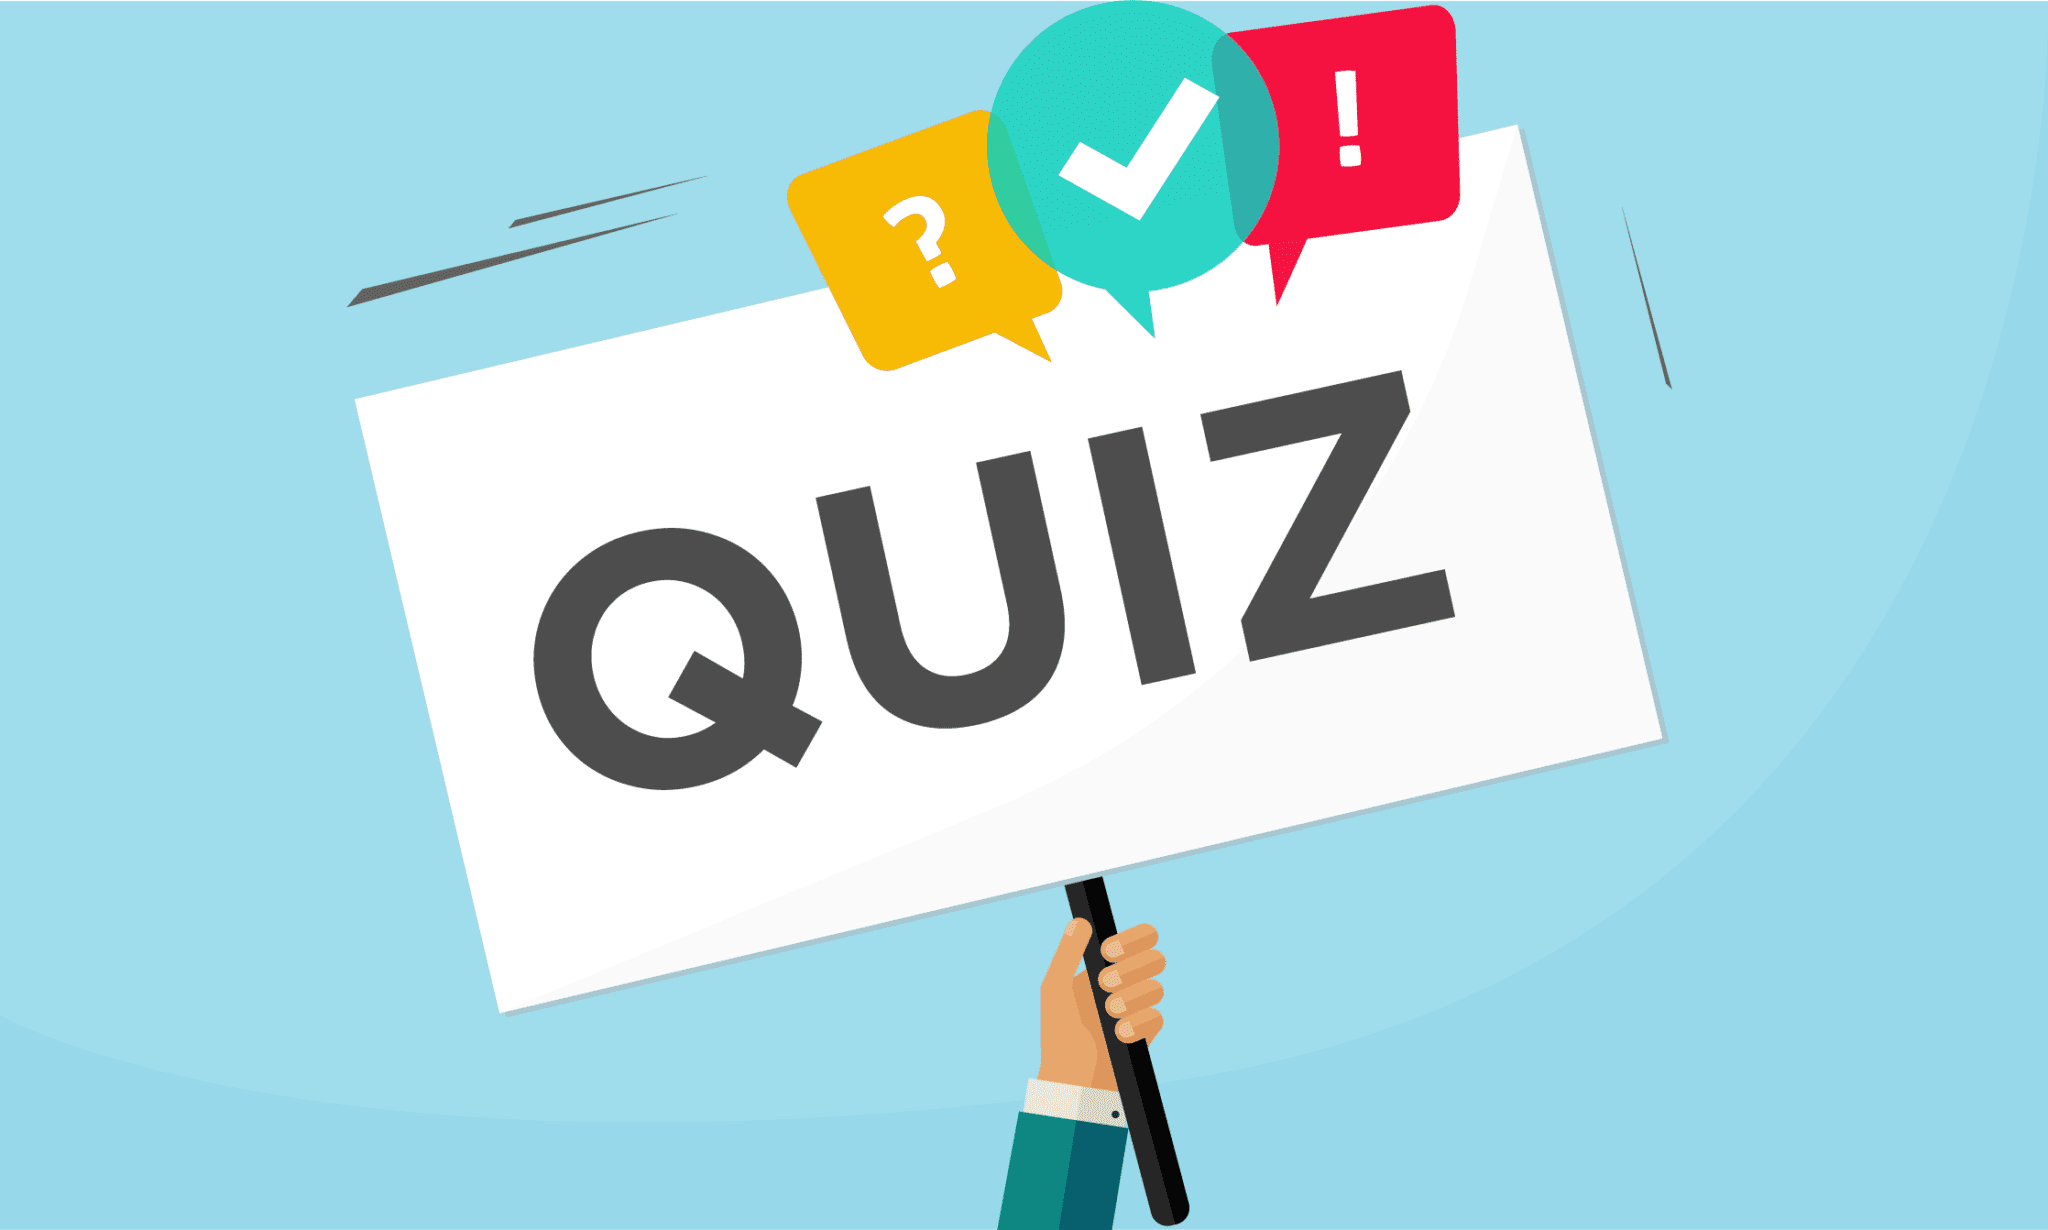 5 Tips for Building Awesome Trivia Quizzes - 2020 Guide.